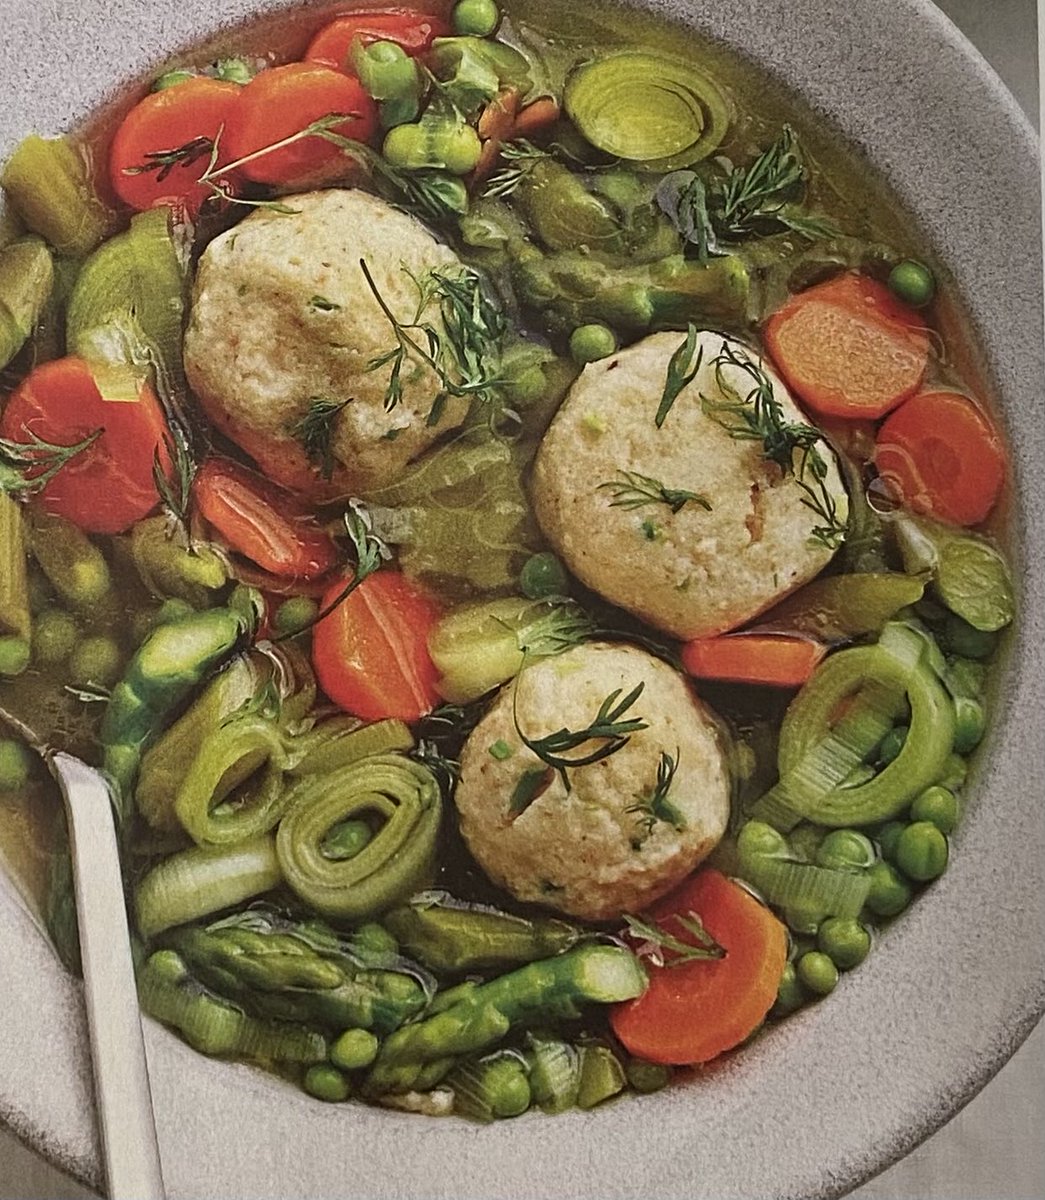 VEGGIE MATZO BALL SOUP To a pot add 🍗 base dissolved in 1/4 c🚰 ➕fresh thyme ➕pepper Bring to a boil Wet hand ✋ and form matzo into 1 inch balls Simmer on low for 30 mins Remove to a 🥣 with a slotted 🥄 To a pot ➕oil when hot ➕🥕leeks asparagus 🧄 stir ➕add hot 🍗stock